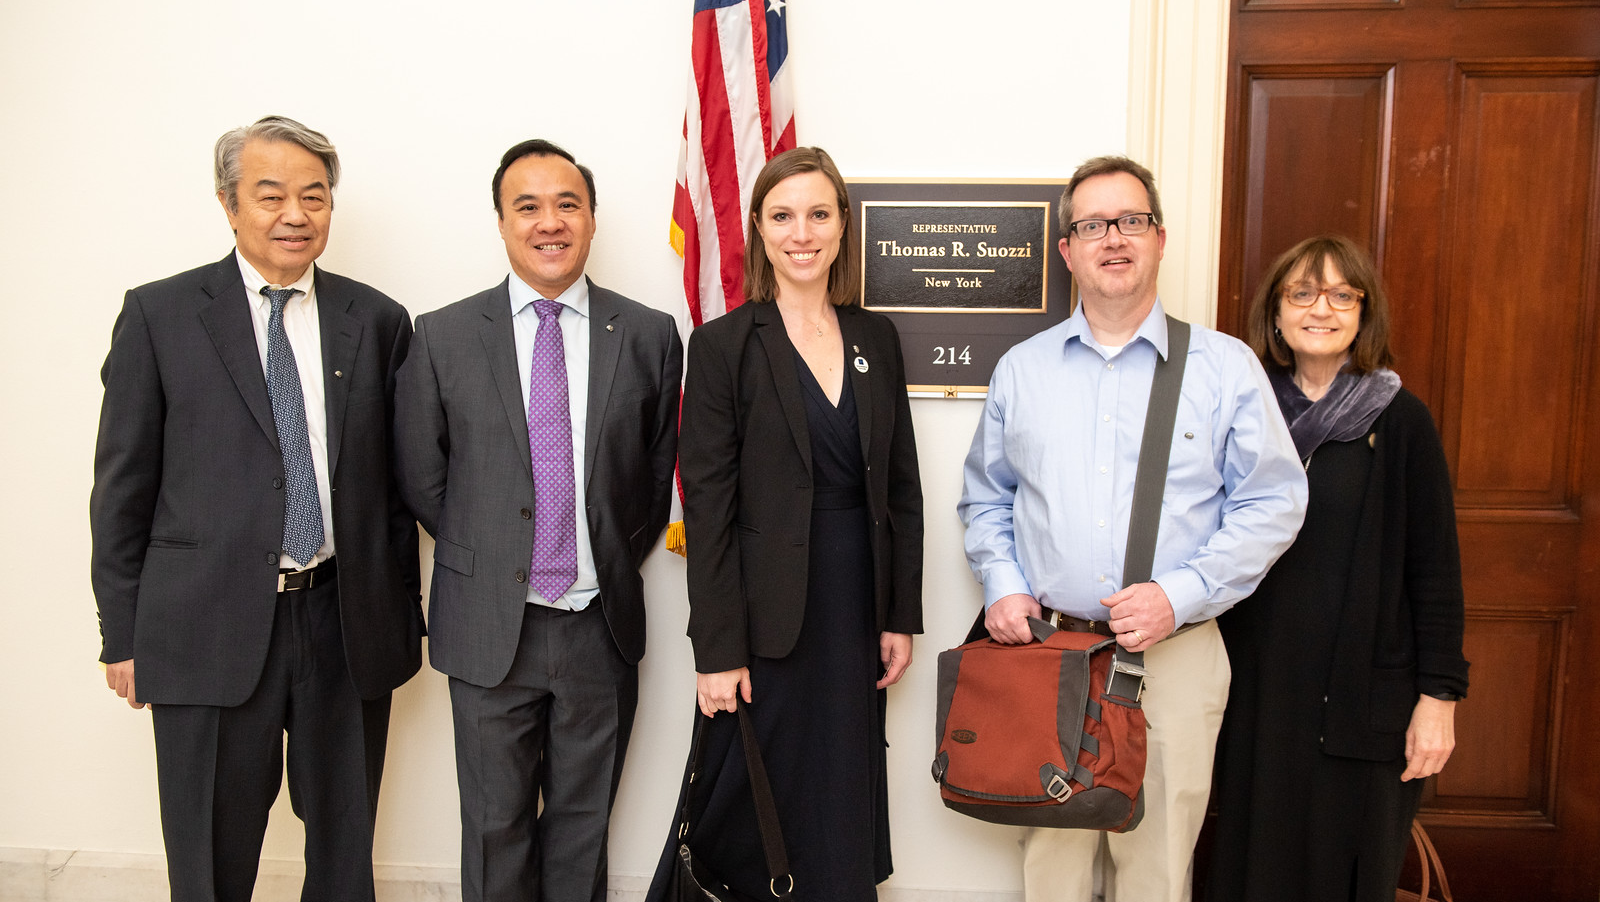 Government and Public Affairs Committee Chair Moses V. Chao (left), along with SfN advocates and GPA members (left to right) Wai “Ho” Yu, Abigail Kalmbach, Steven Shea, and Helen Mayburg, pose outside Rep. Tom Suozzi’s (D-NY) office following their Capitol Hill Day meeting.